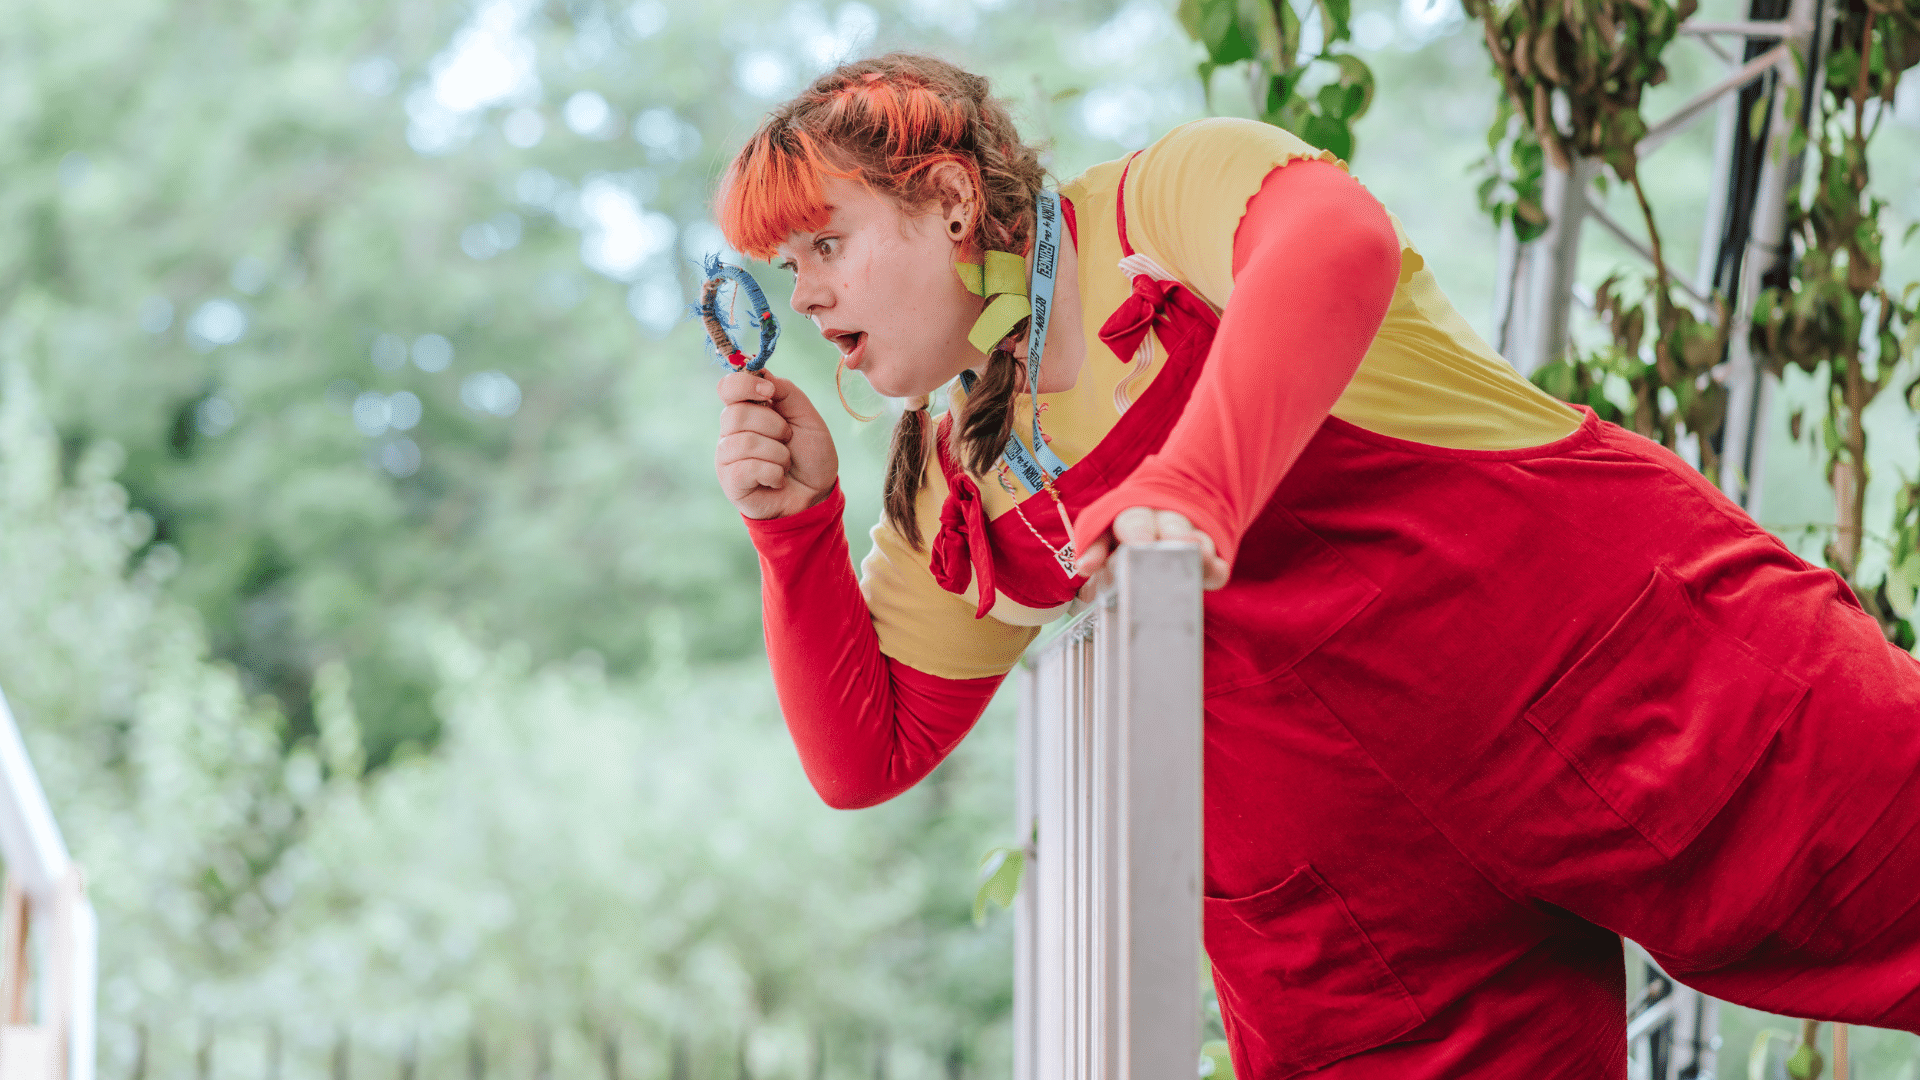 Meet Astrid Lindgren's Pippi Longstocking production photo - Sofie Miller as Pippi Longstocking holding a magnifying glass to her face and looking through it. She has red hair in pigtails and wears red dungarees above a yellow top.